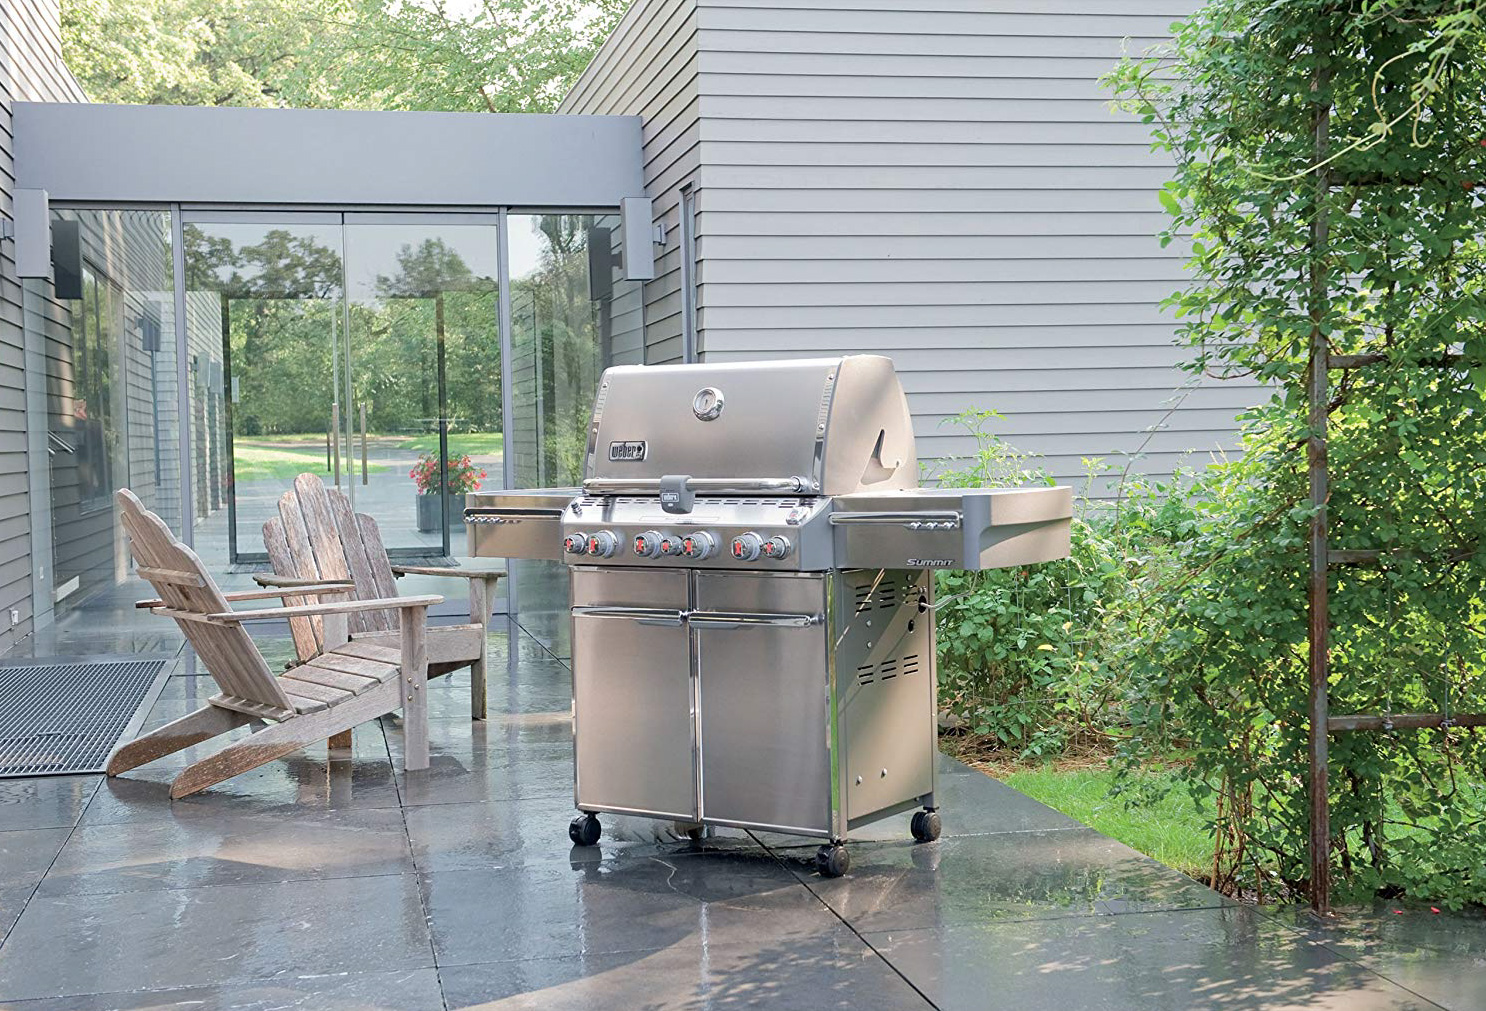 Are Weber Grills Overpriced?